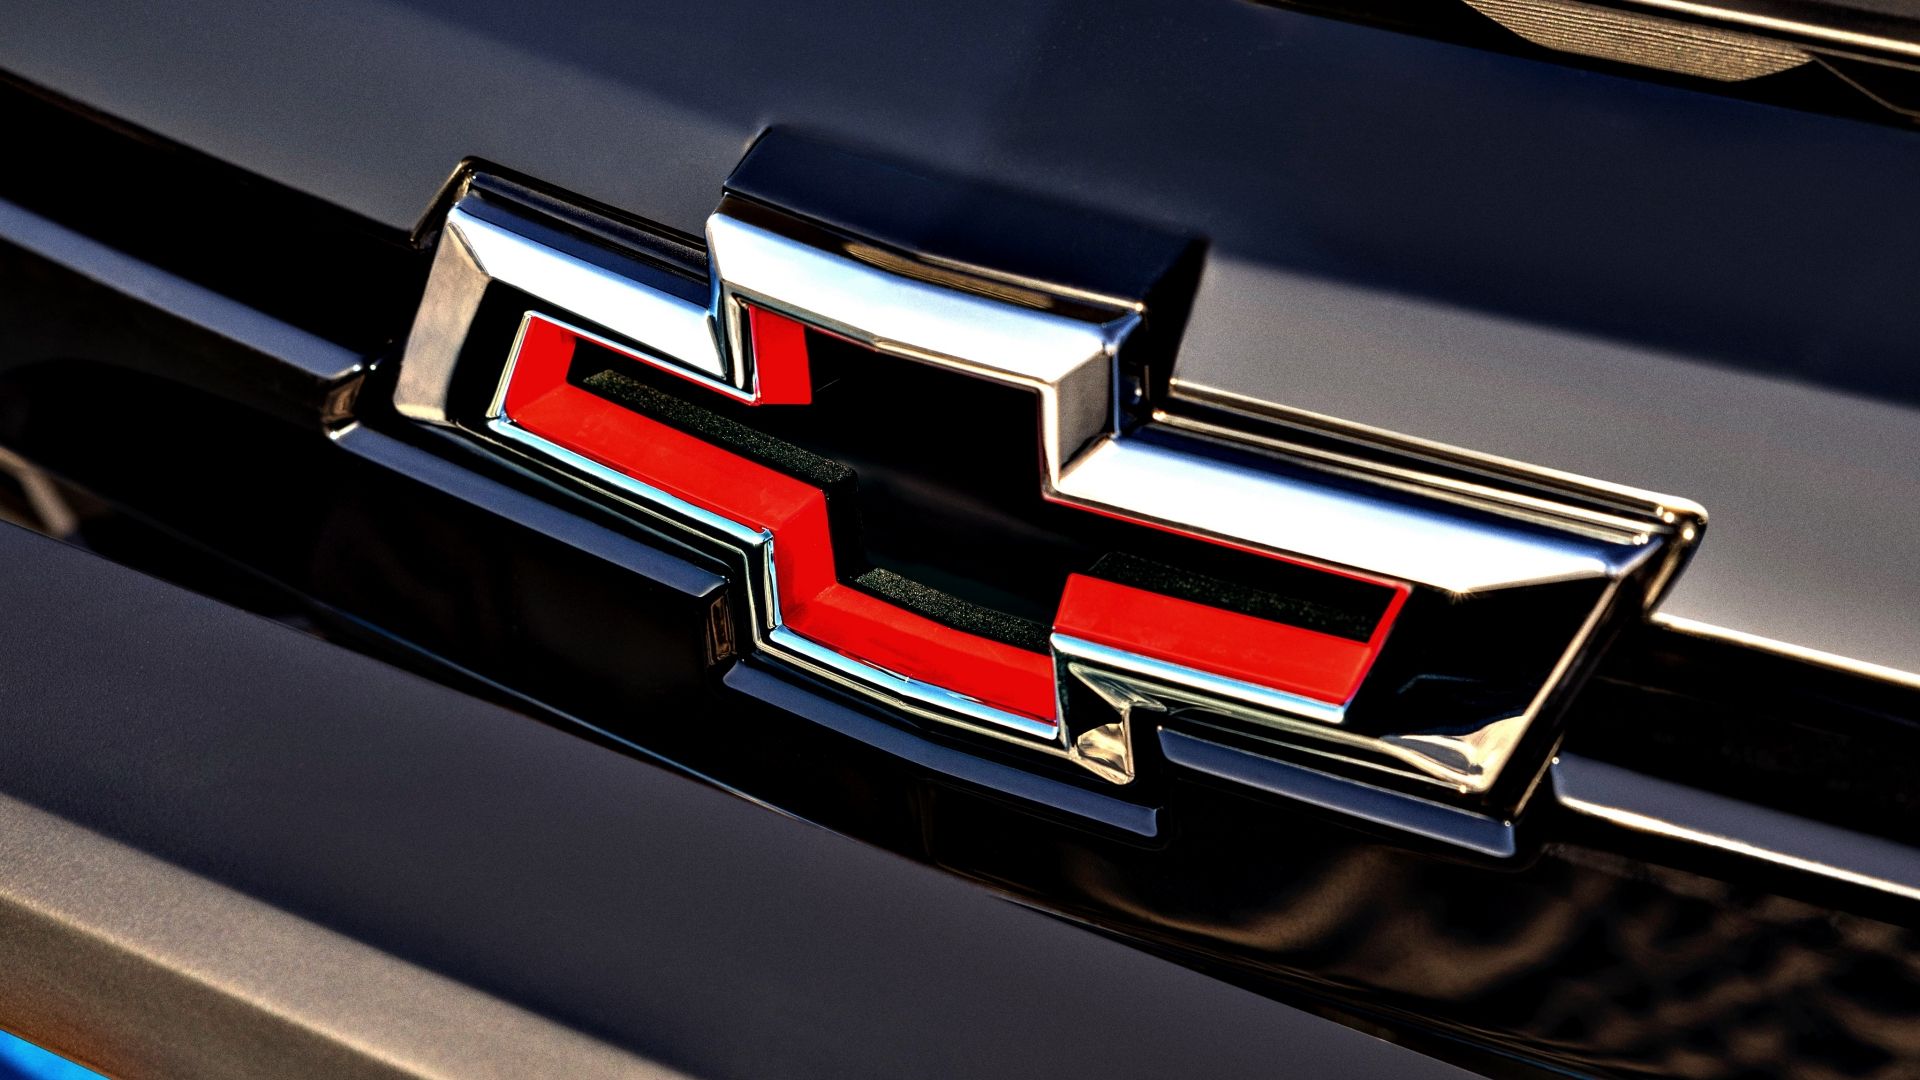 The History And Science Behind Chevy's Flowtie Badge